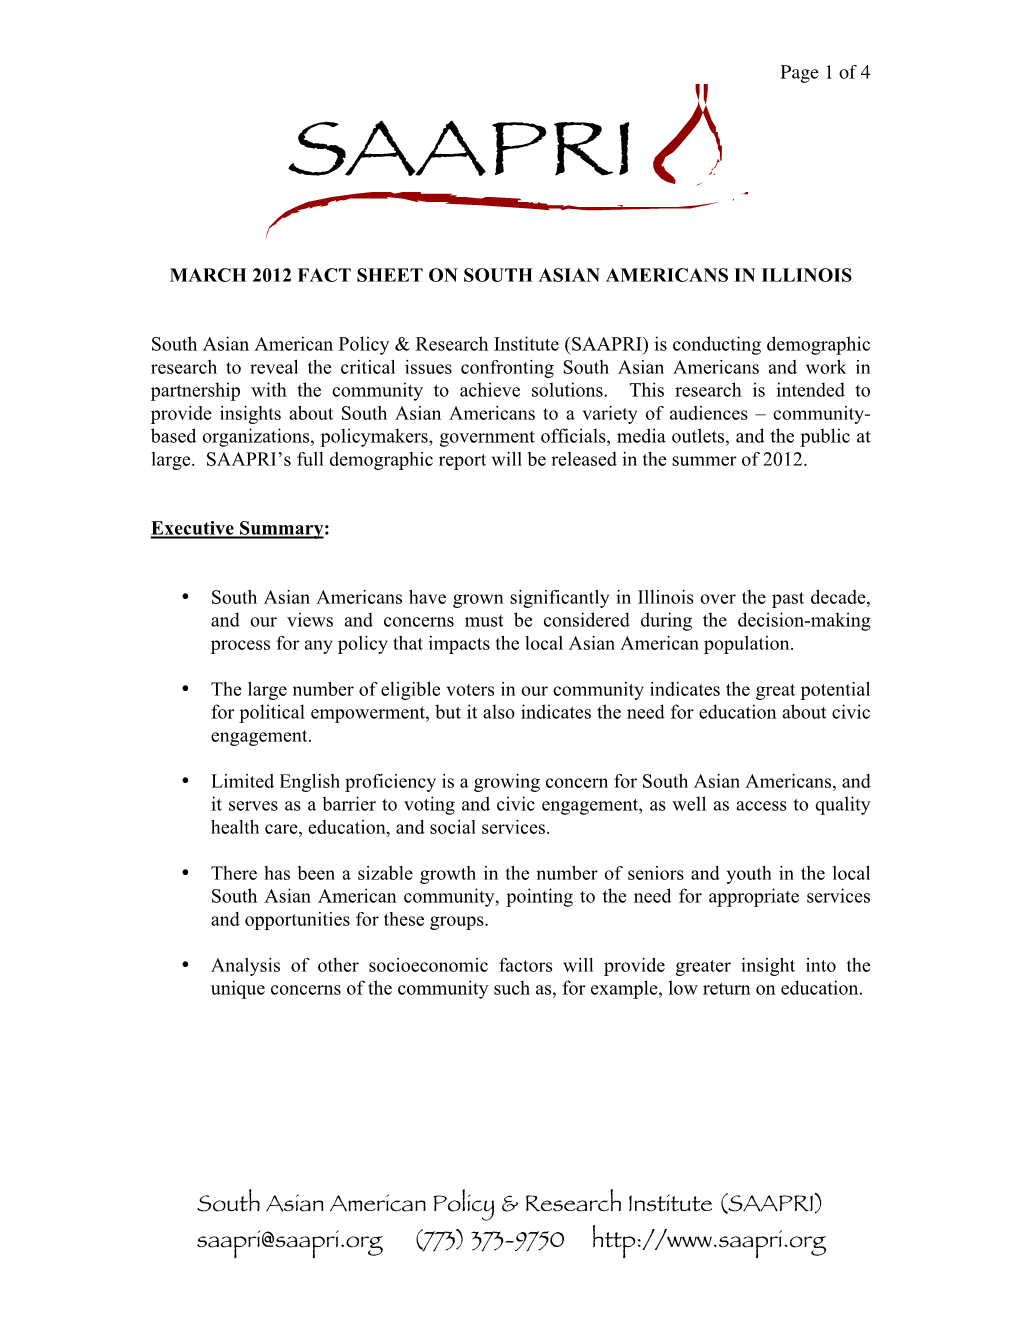 SAAPRI Fact Sheet for March 17 Event